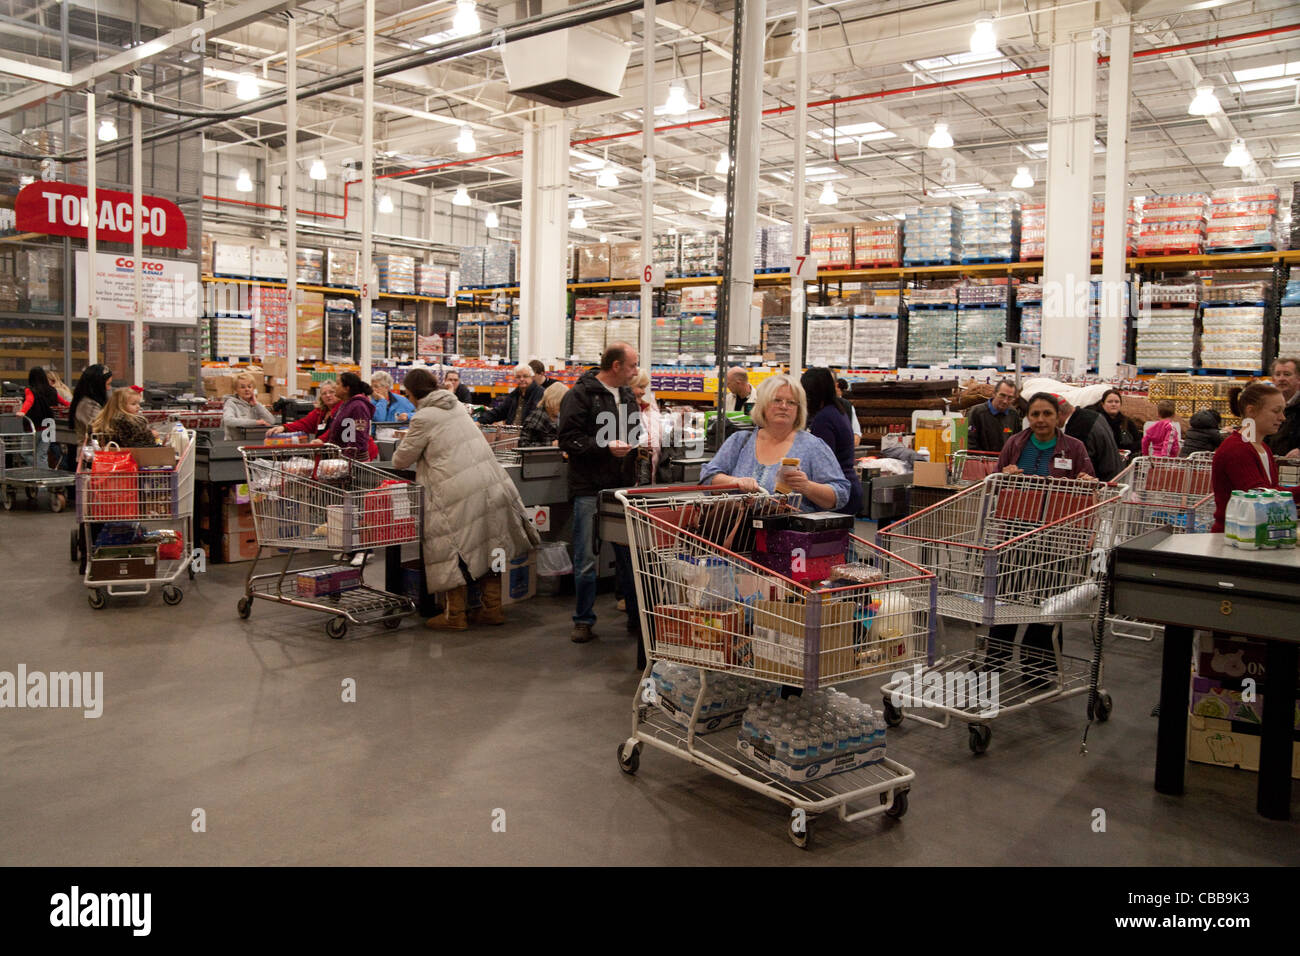 People at the checkout tills, Costco discount warehouse store, Lakeside UK Stock Photo